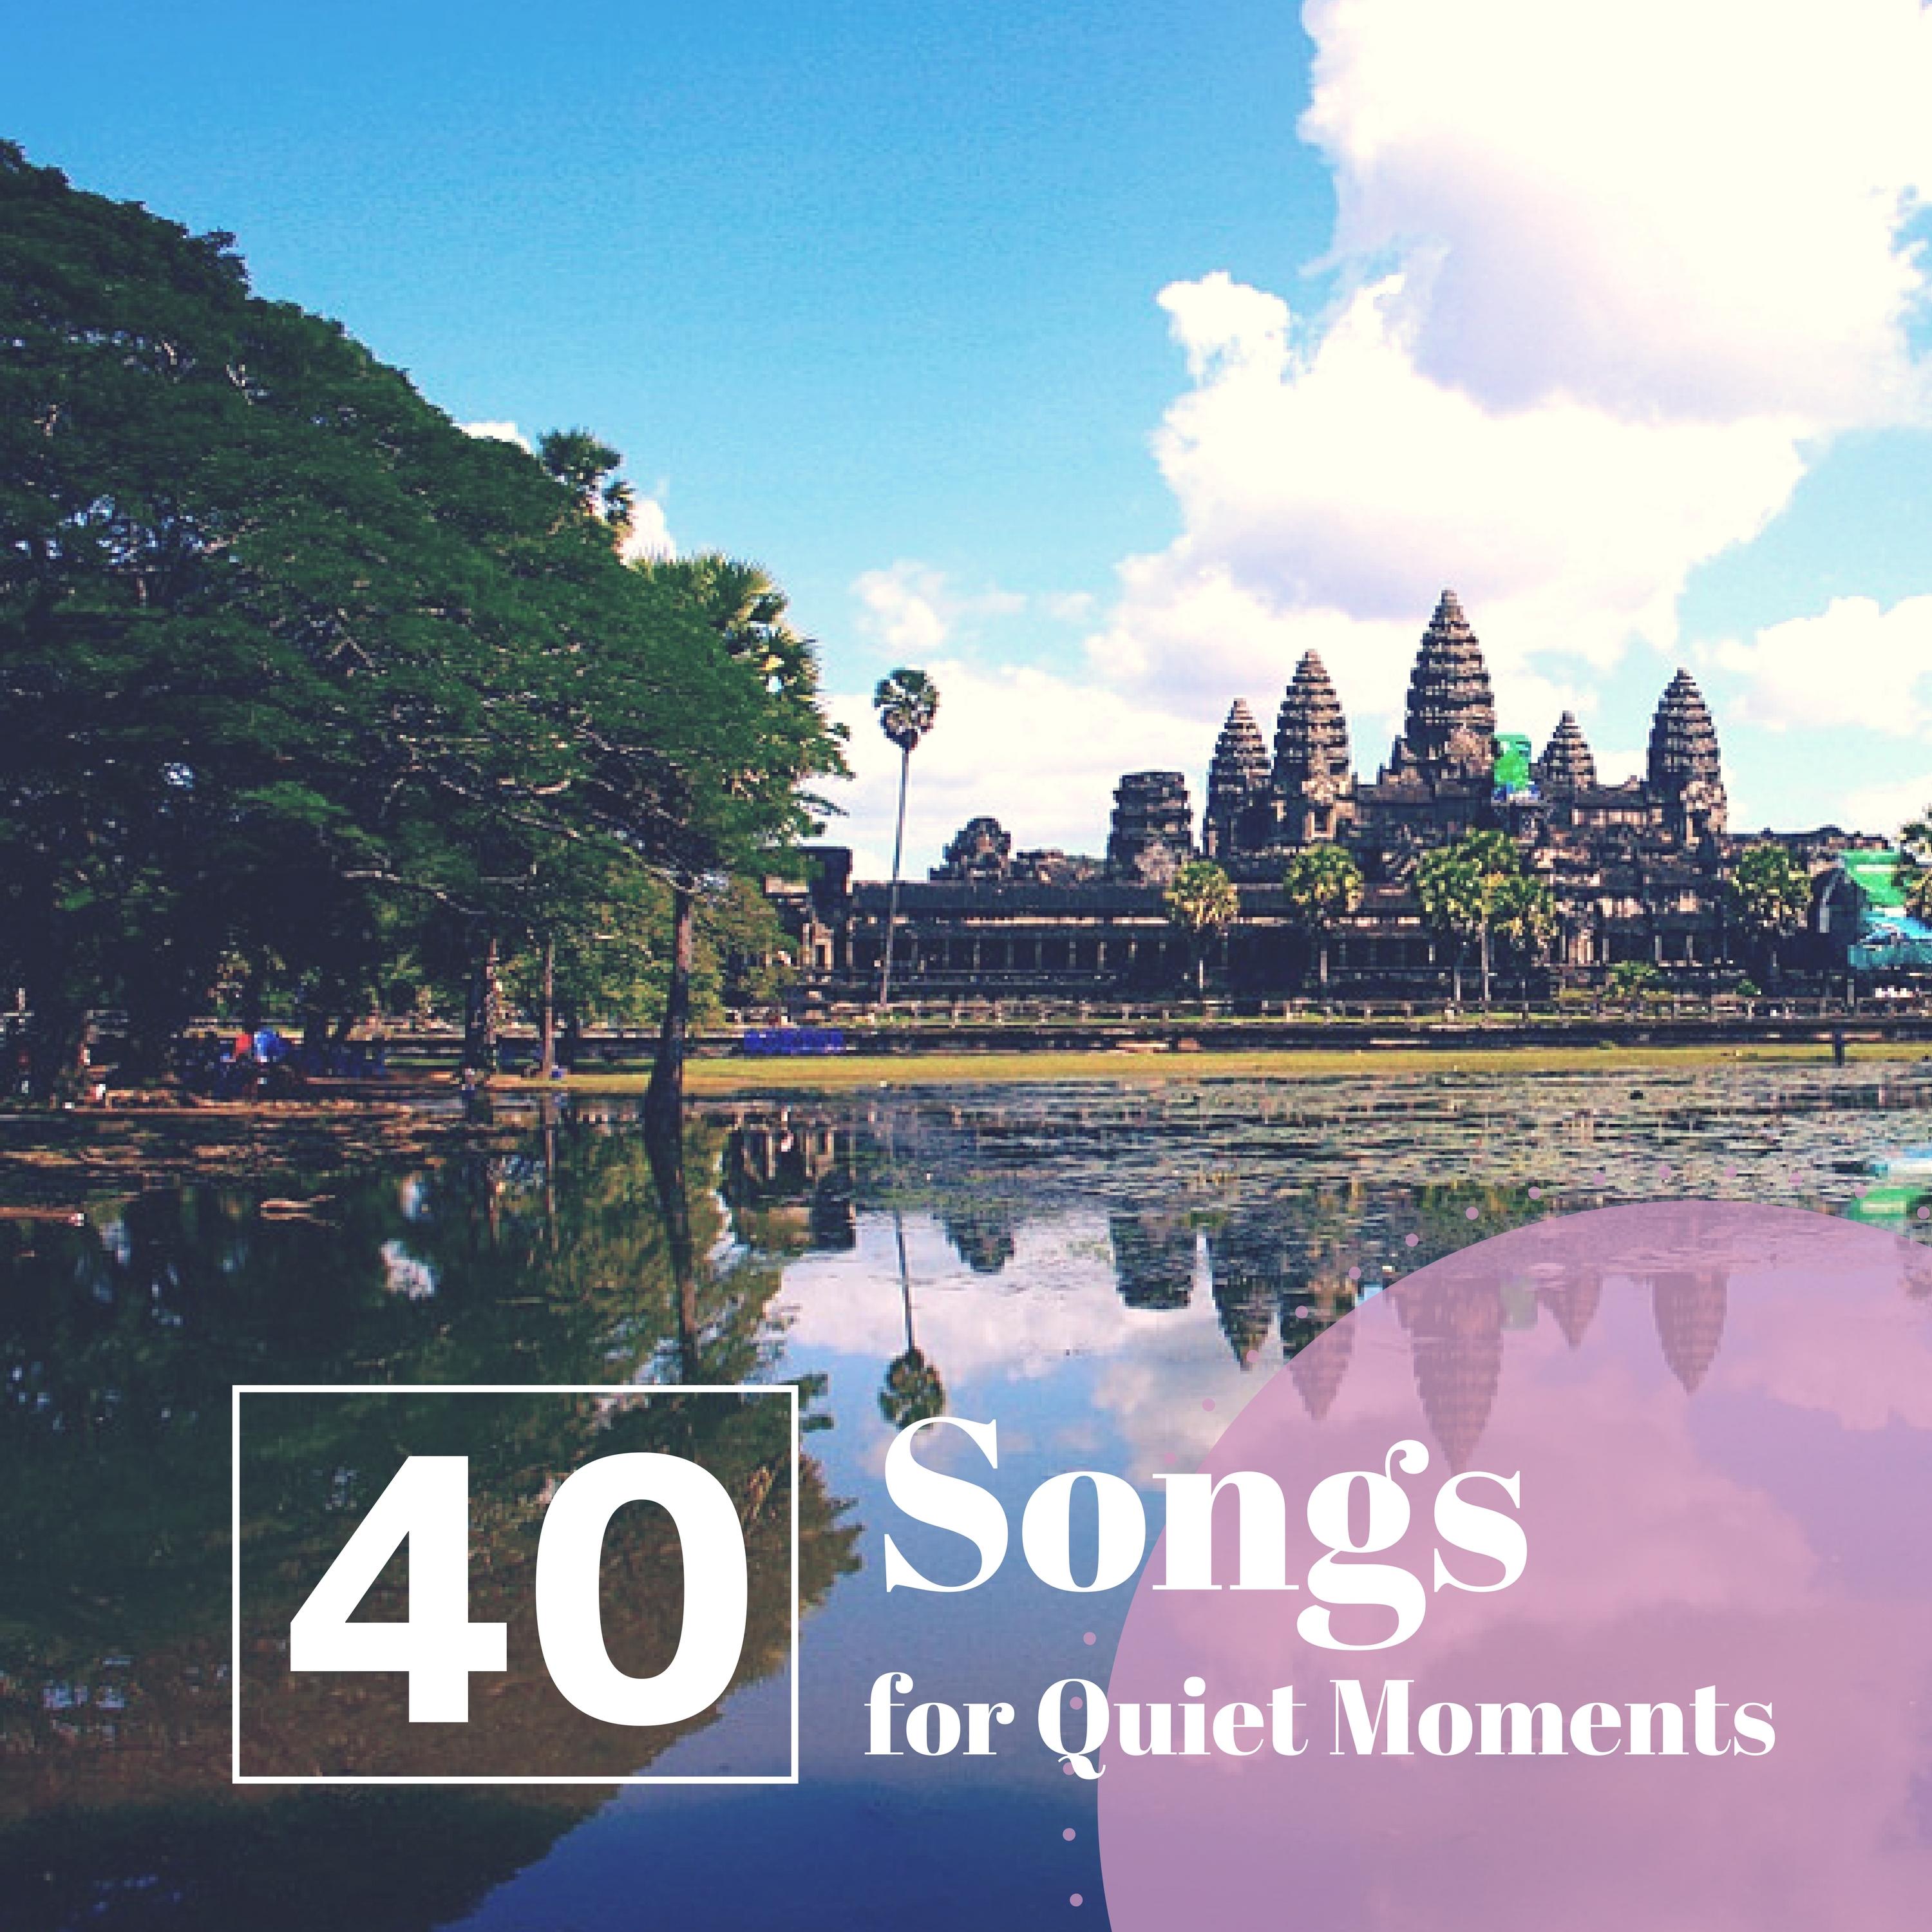 40 Songs for Quiet Moments - Deep Meditation & Chakra Music, Mindfulness to Reduce Stress